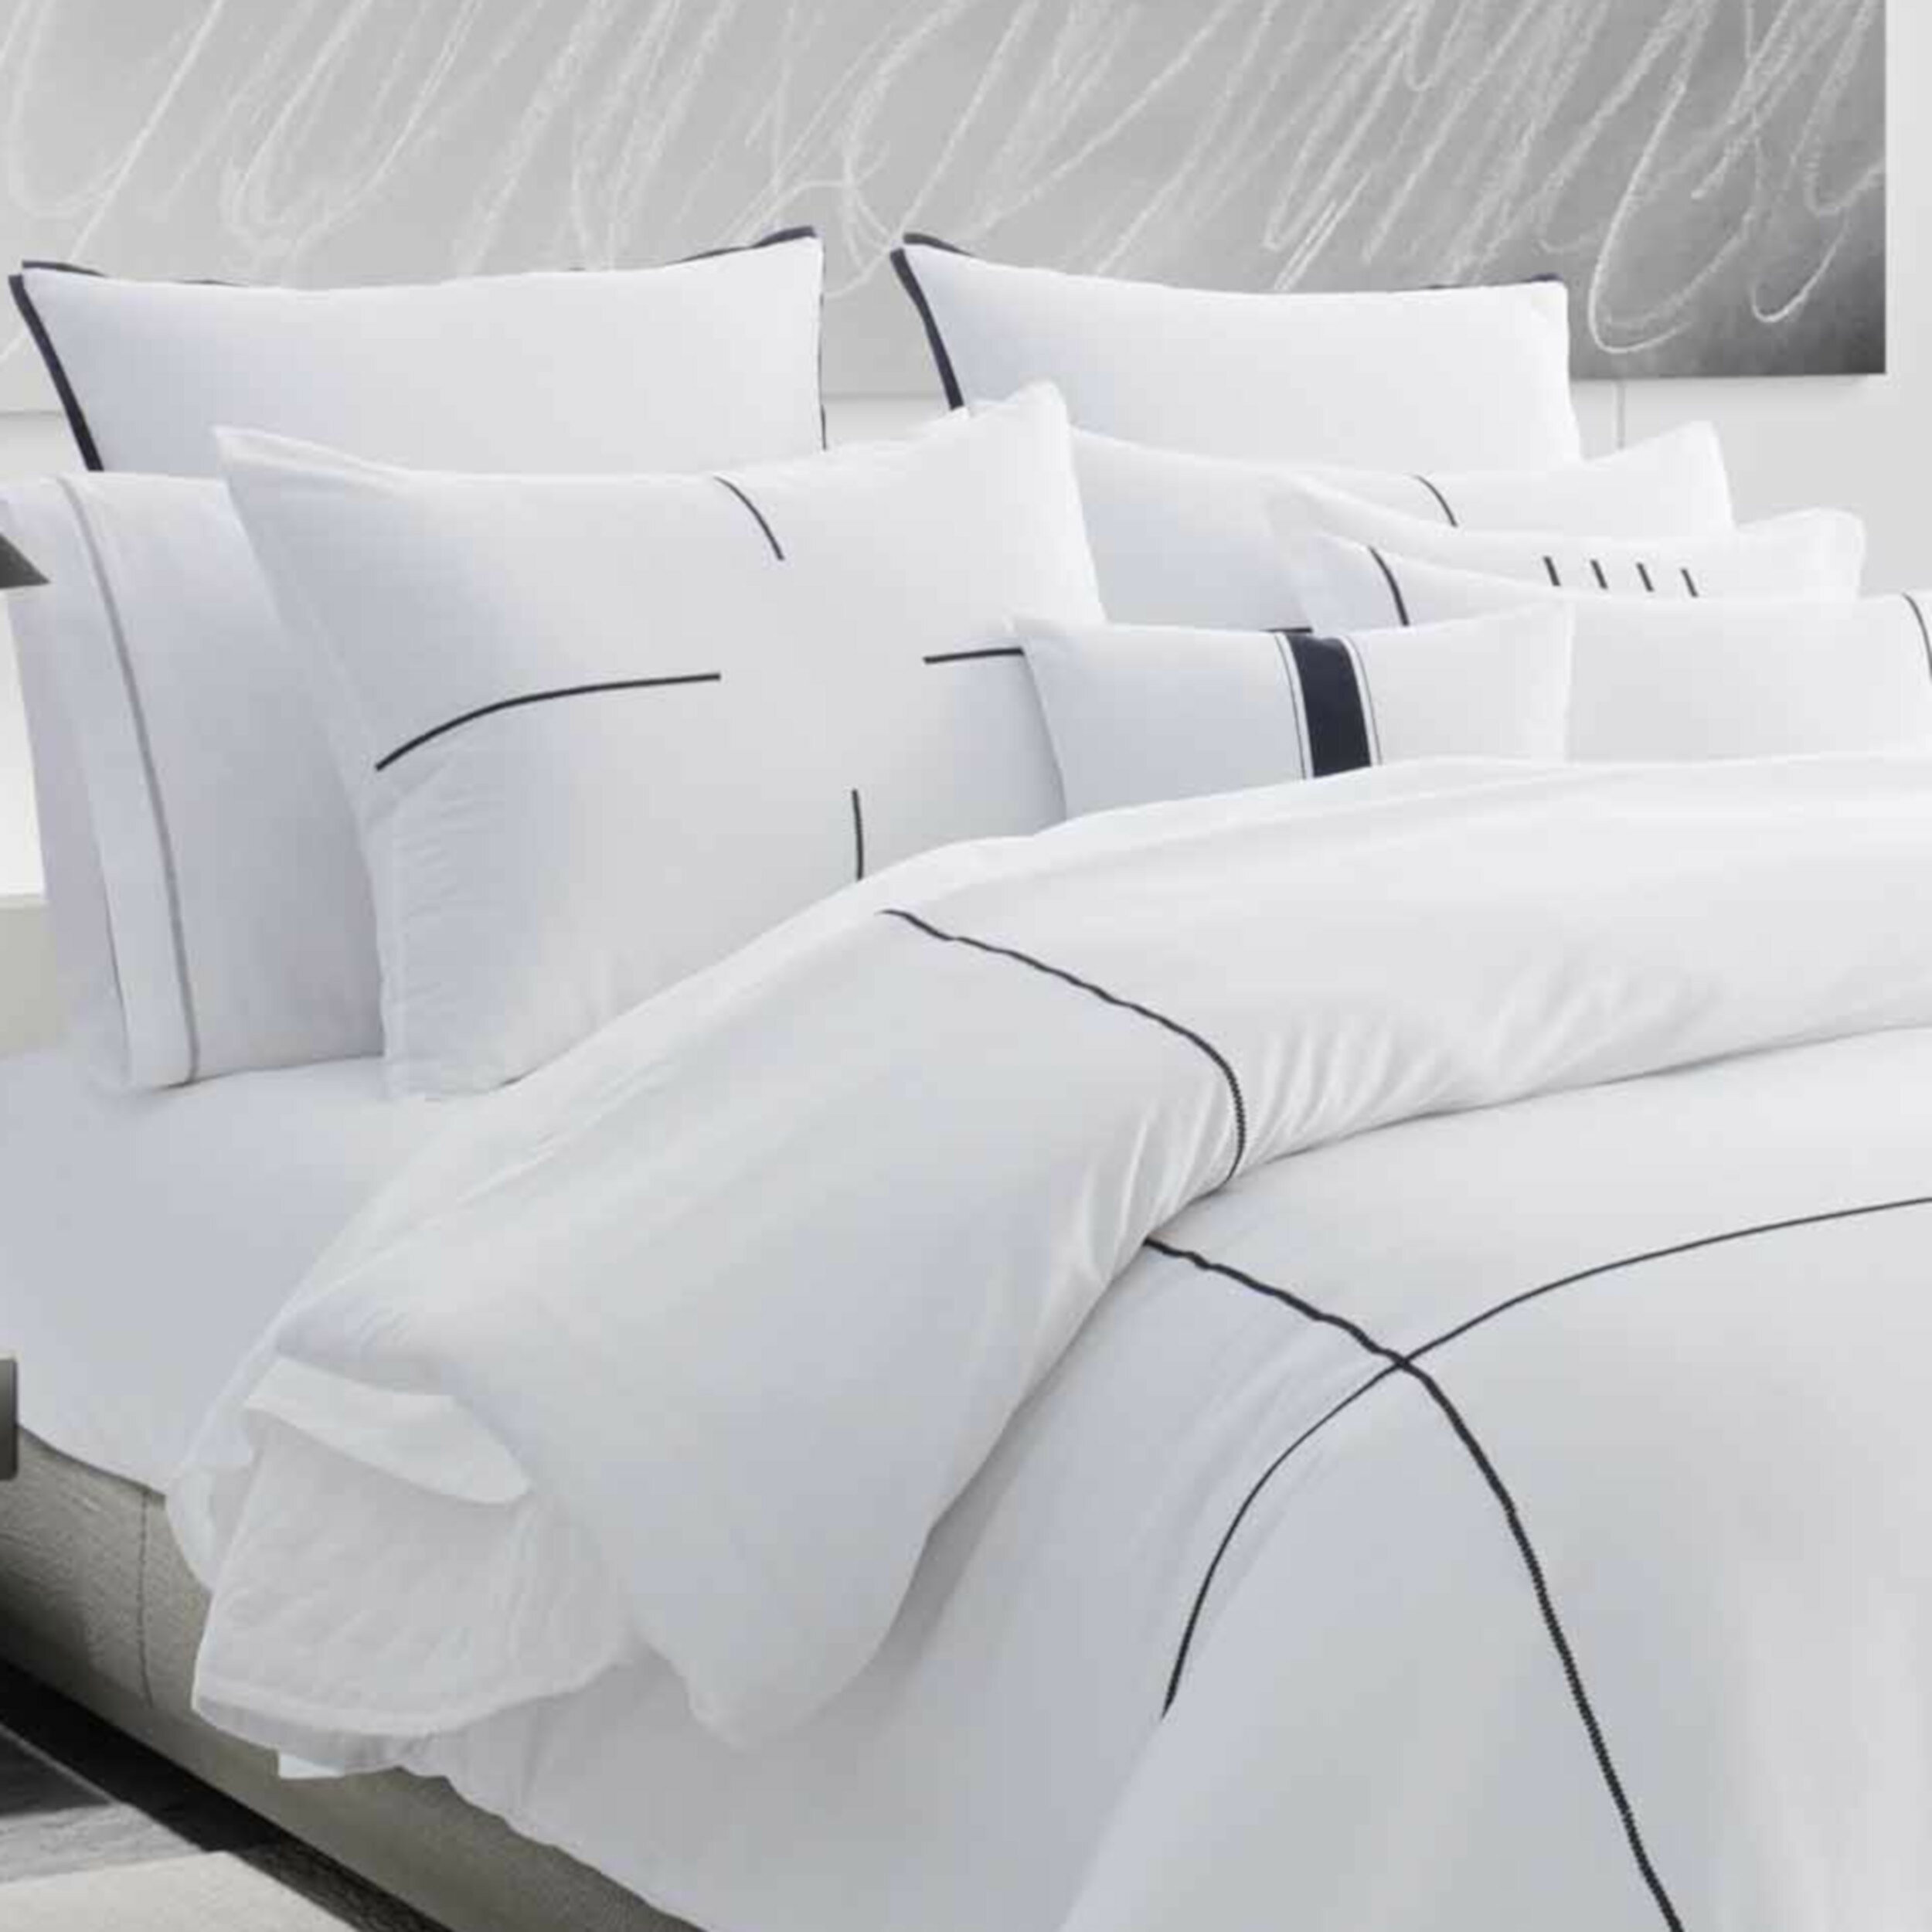 Luxury 3pc White on White Embroidered Duvet Cover Bedding Set with Shams 